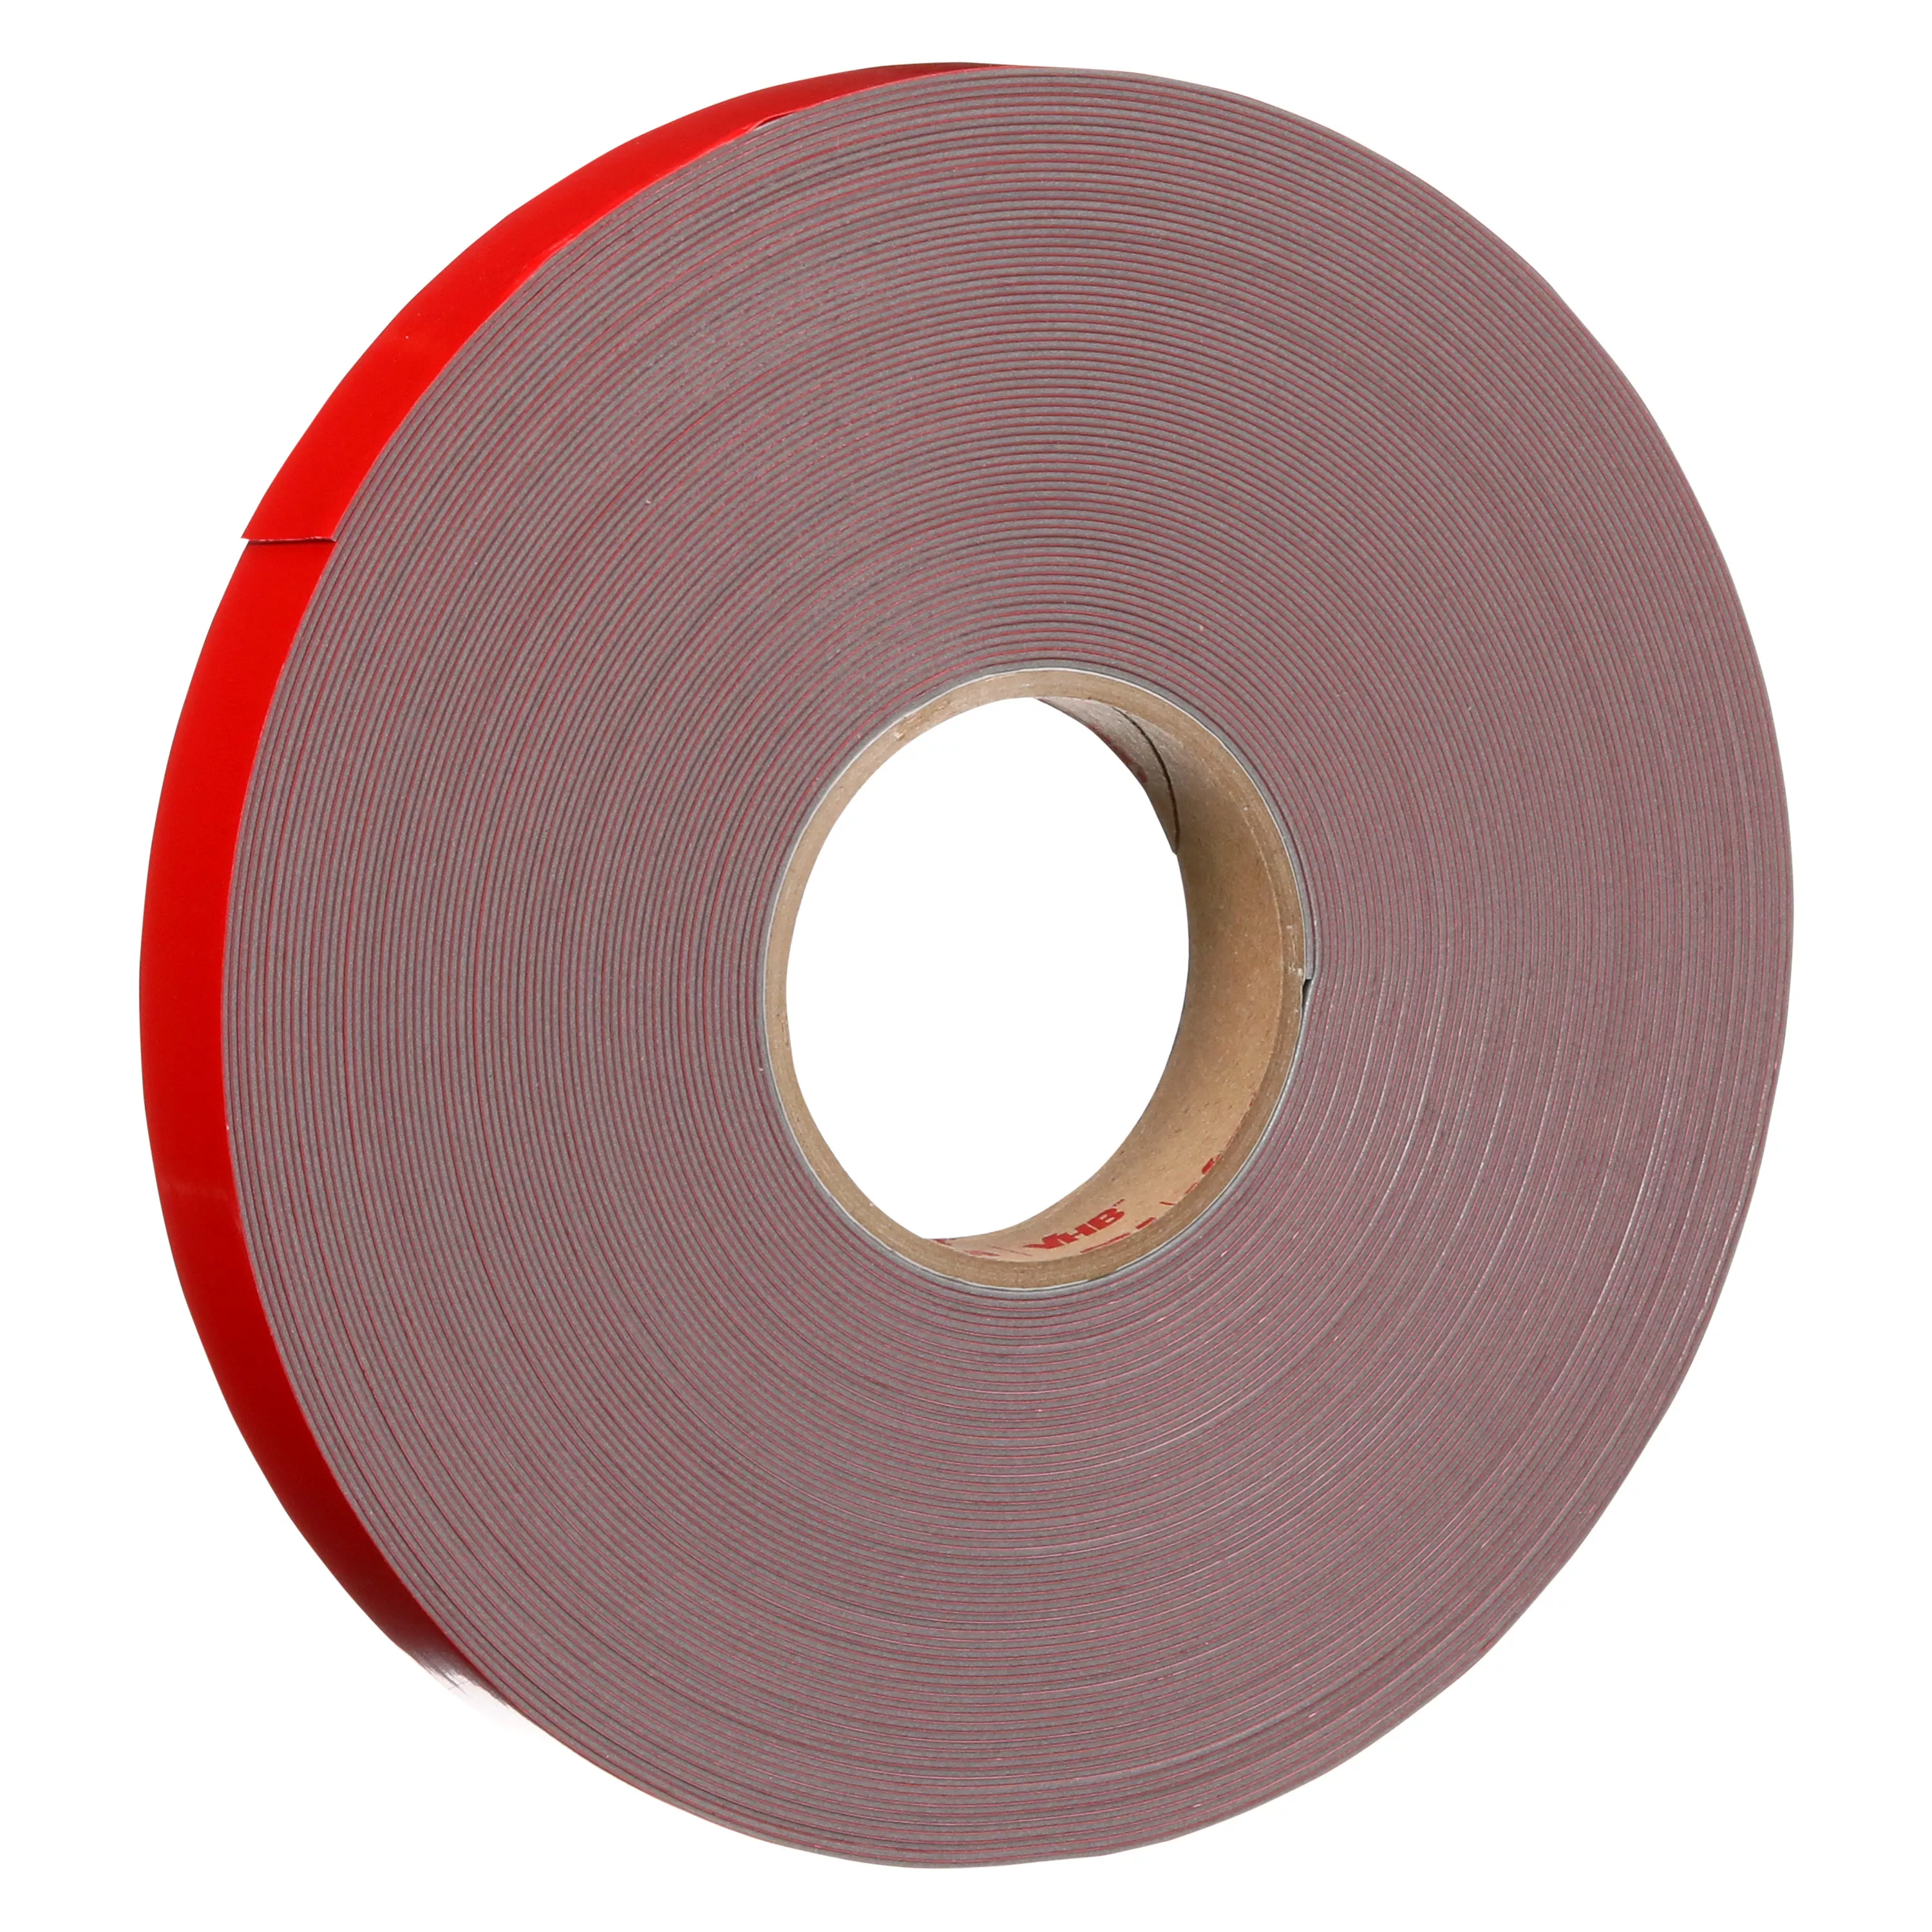 Product Number 4941 | 3M™ VHB™ Tape 4941F